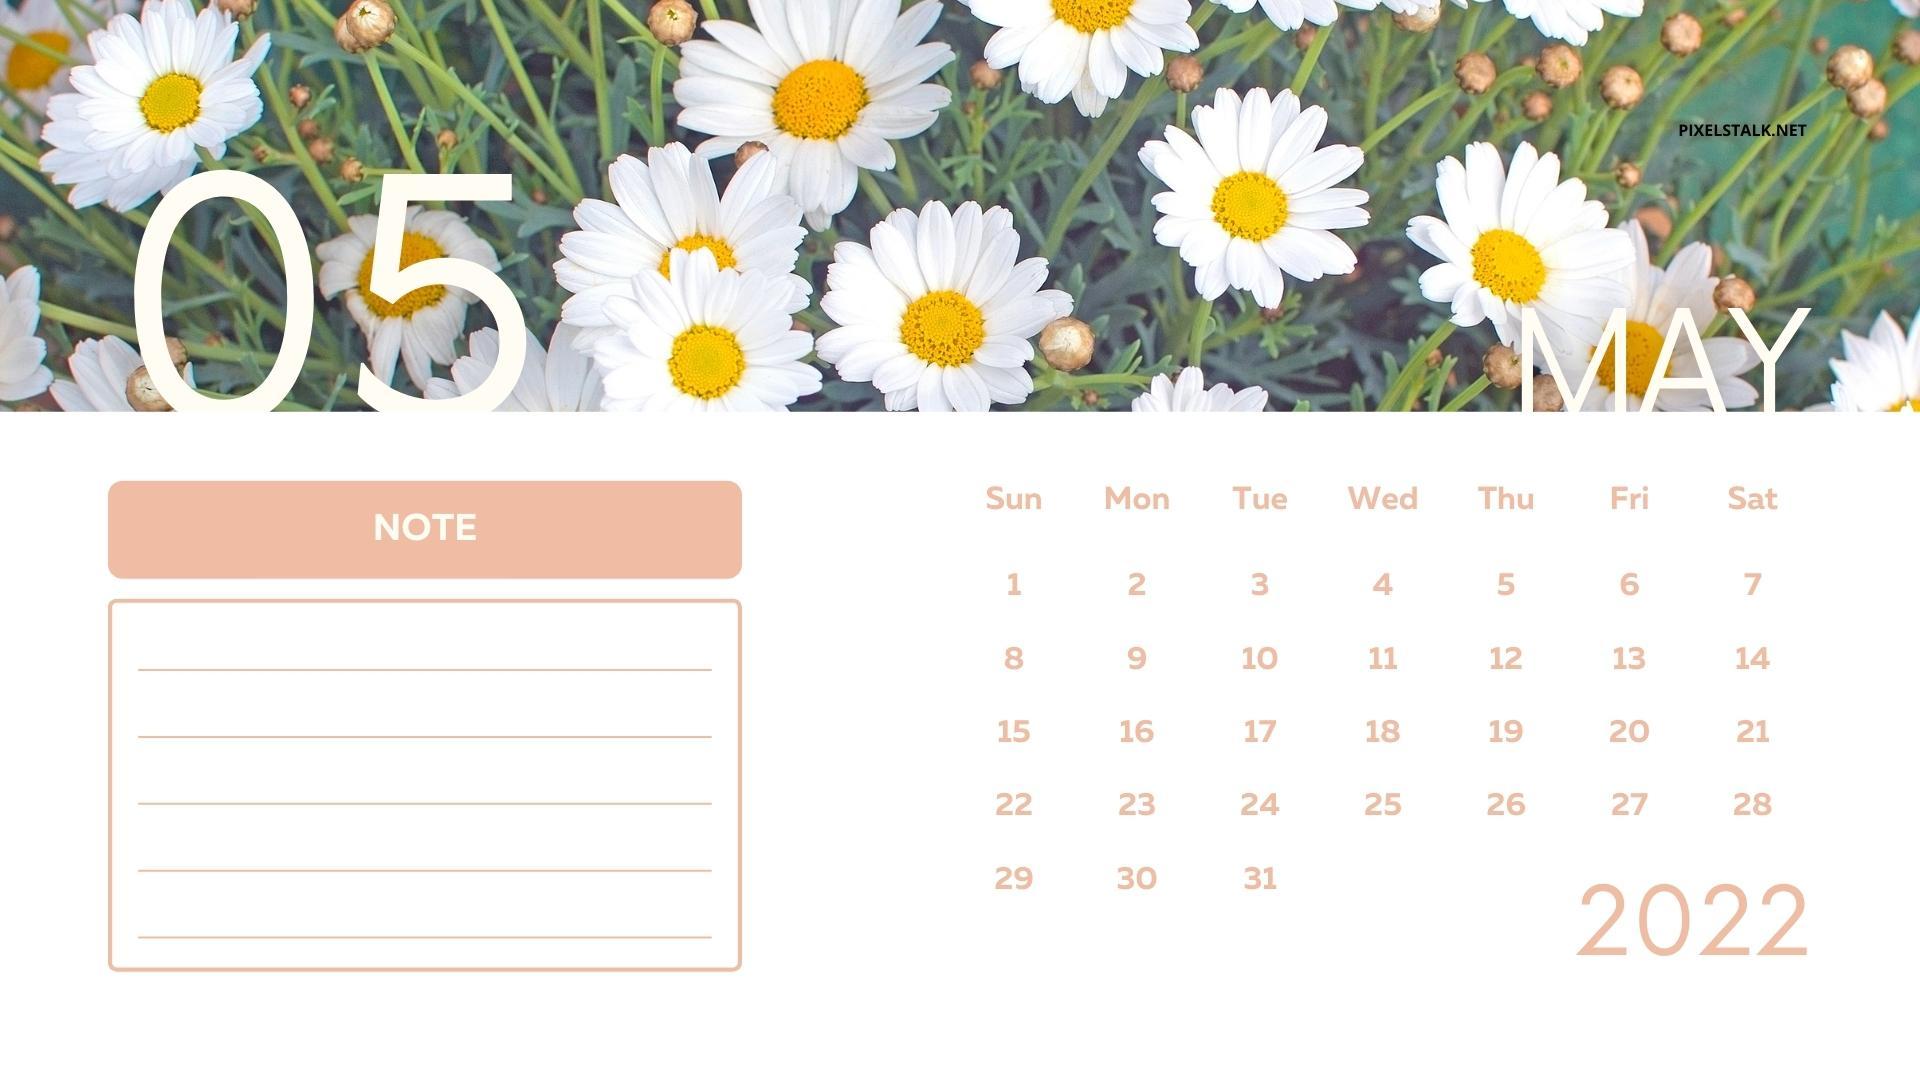 Download wallpapers 2022 May Calendar 4k pink flowers May spring art  2022 spring calendars spring background with flowers May 2022 Calendar  paper flowers for desktop free Pictures for desktop free